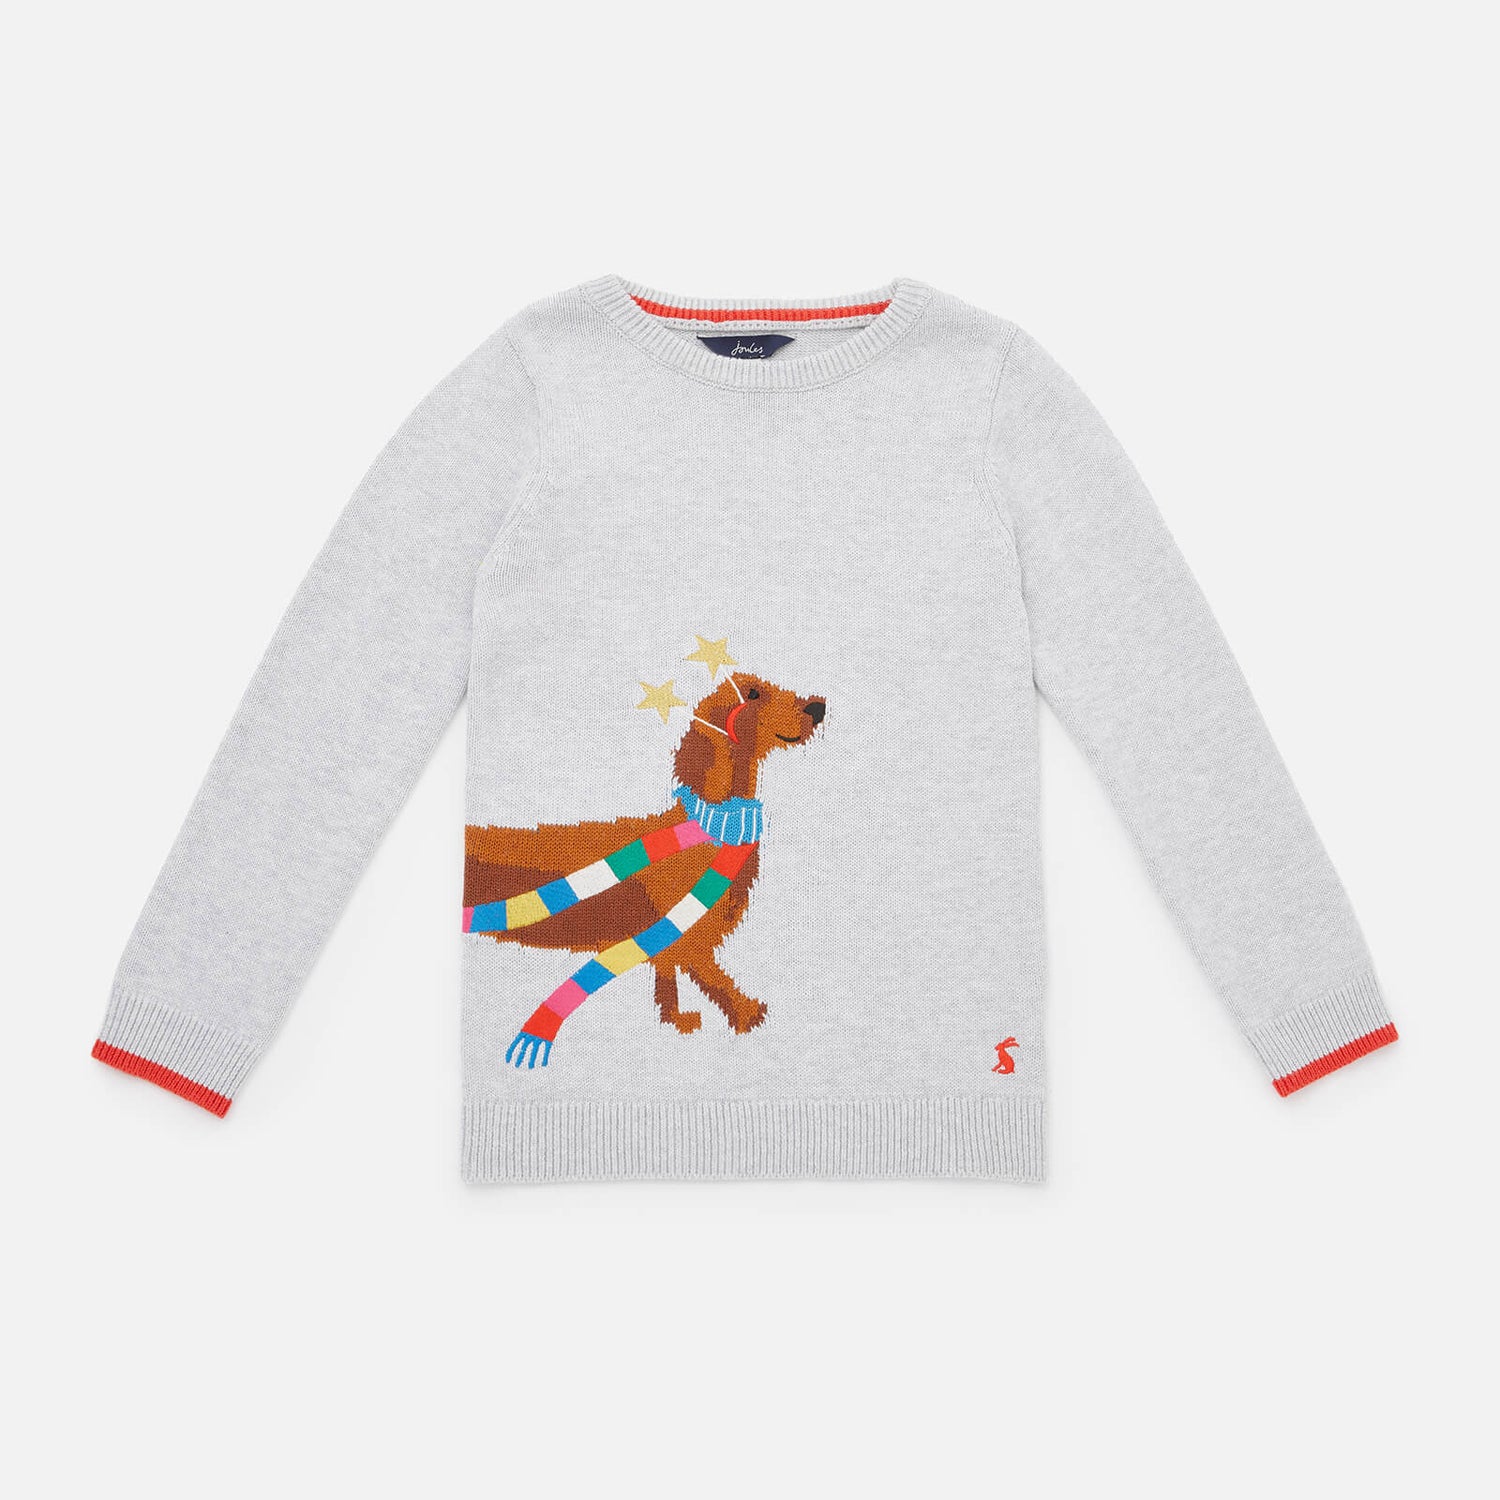 Joules Kids Festive Cracking Dog Cotton Jumper - 3 Years